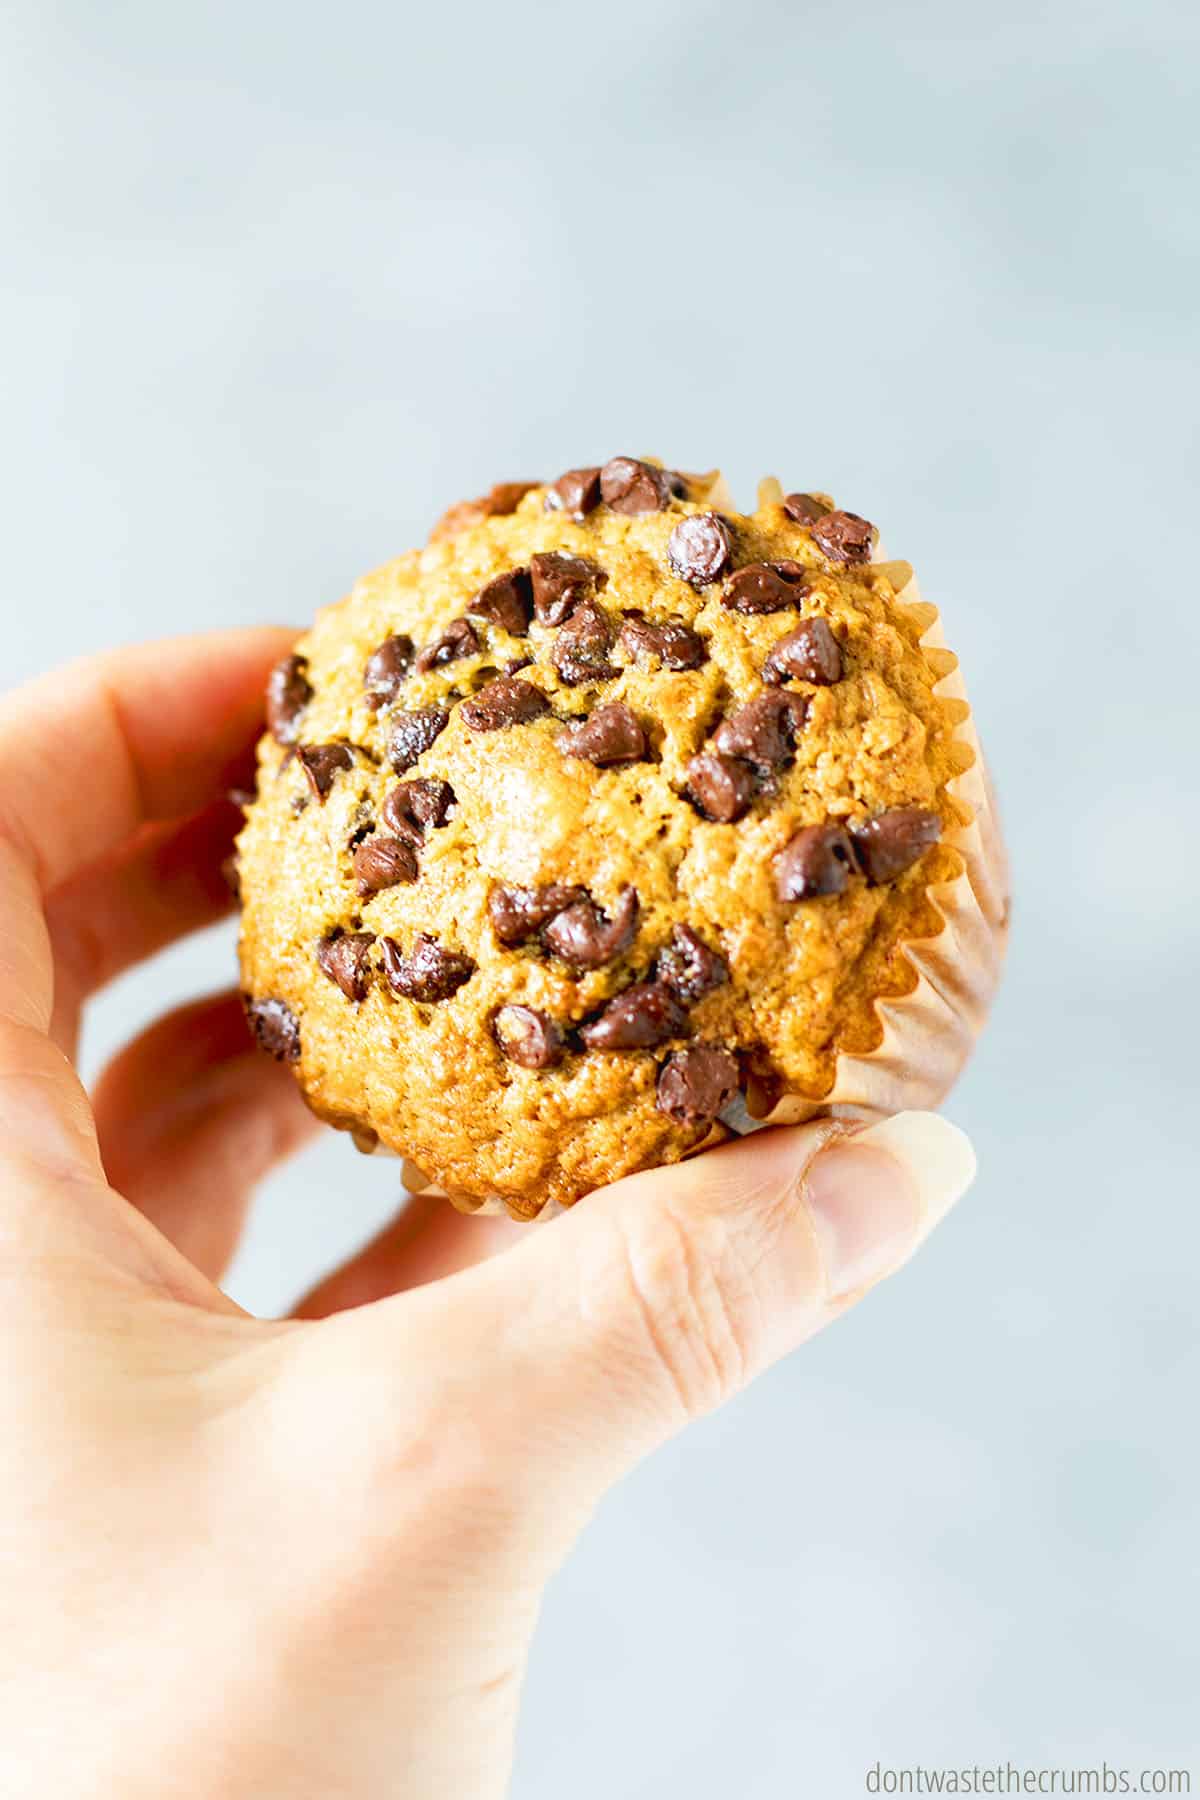 Hand holding buttermilk oatmeal muffin topped with chocolate chips